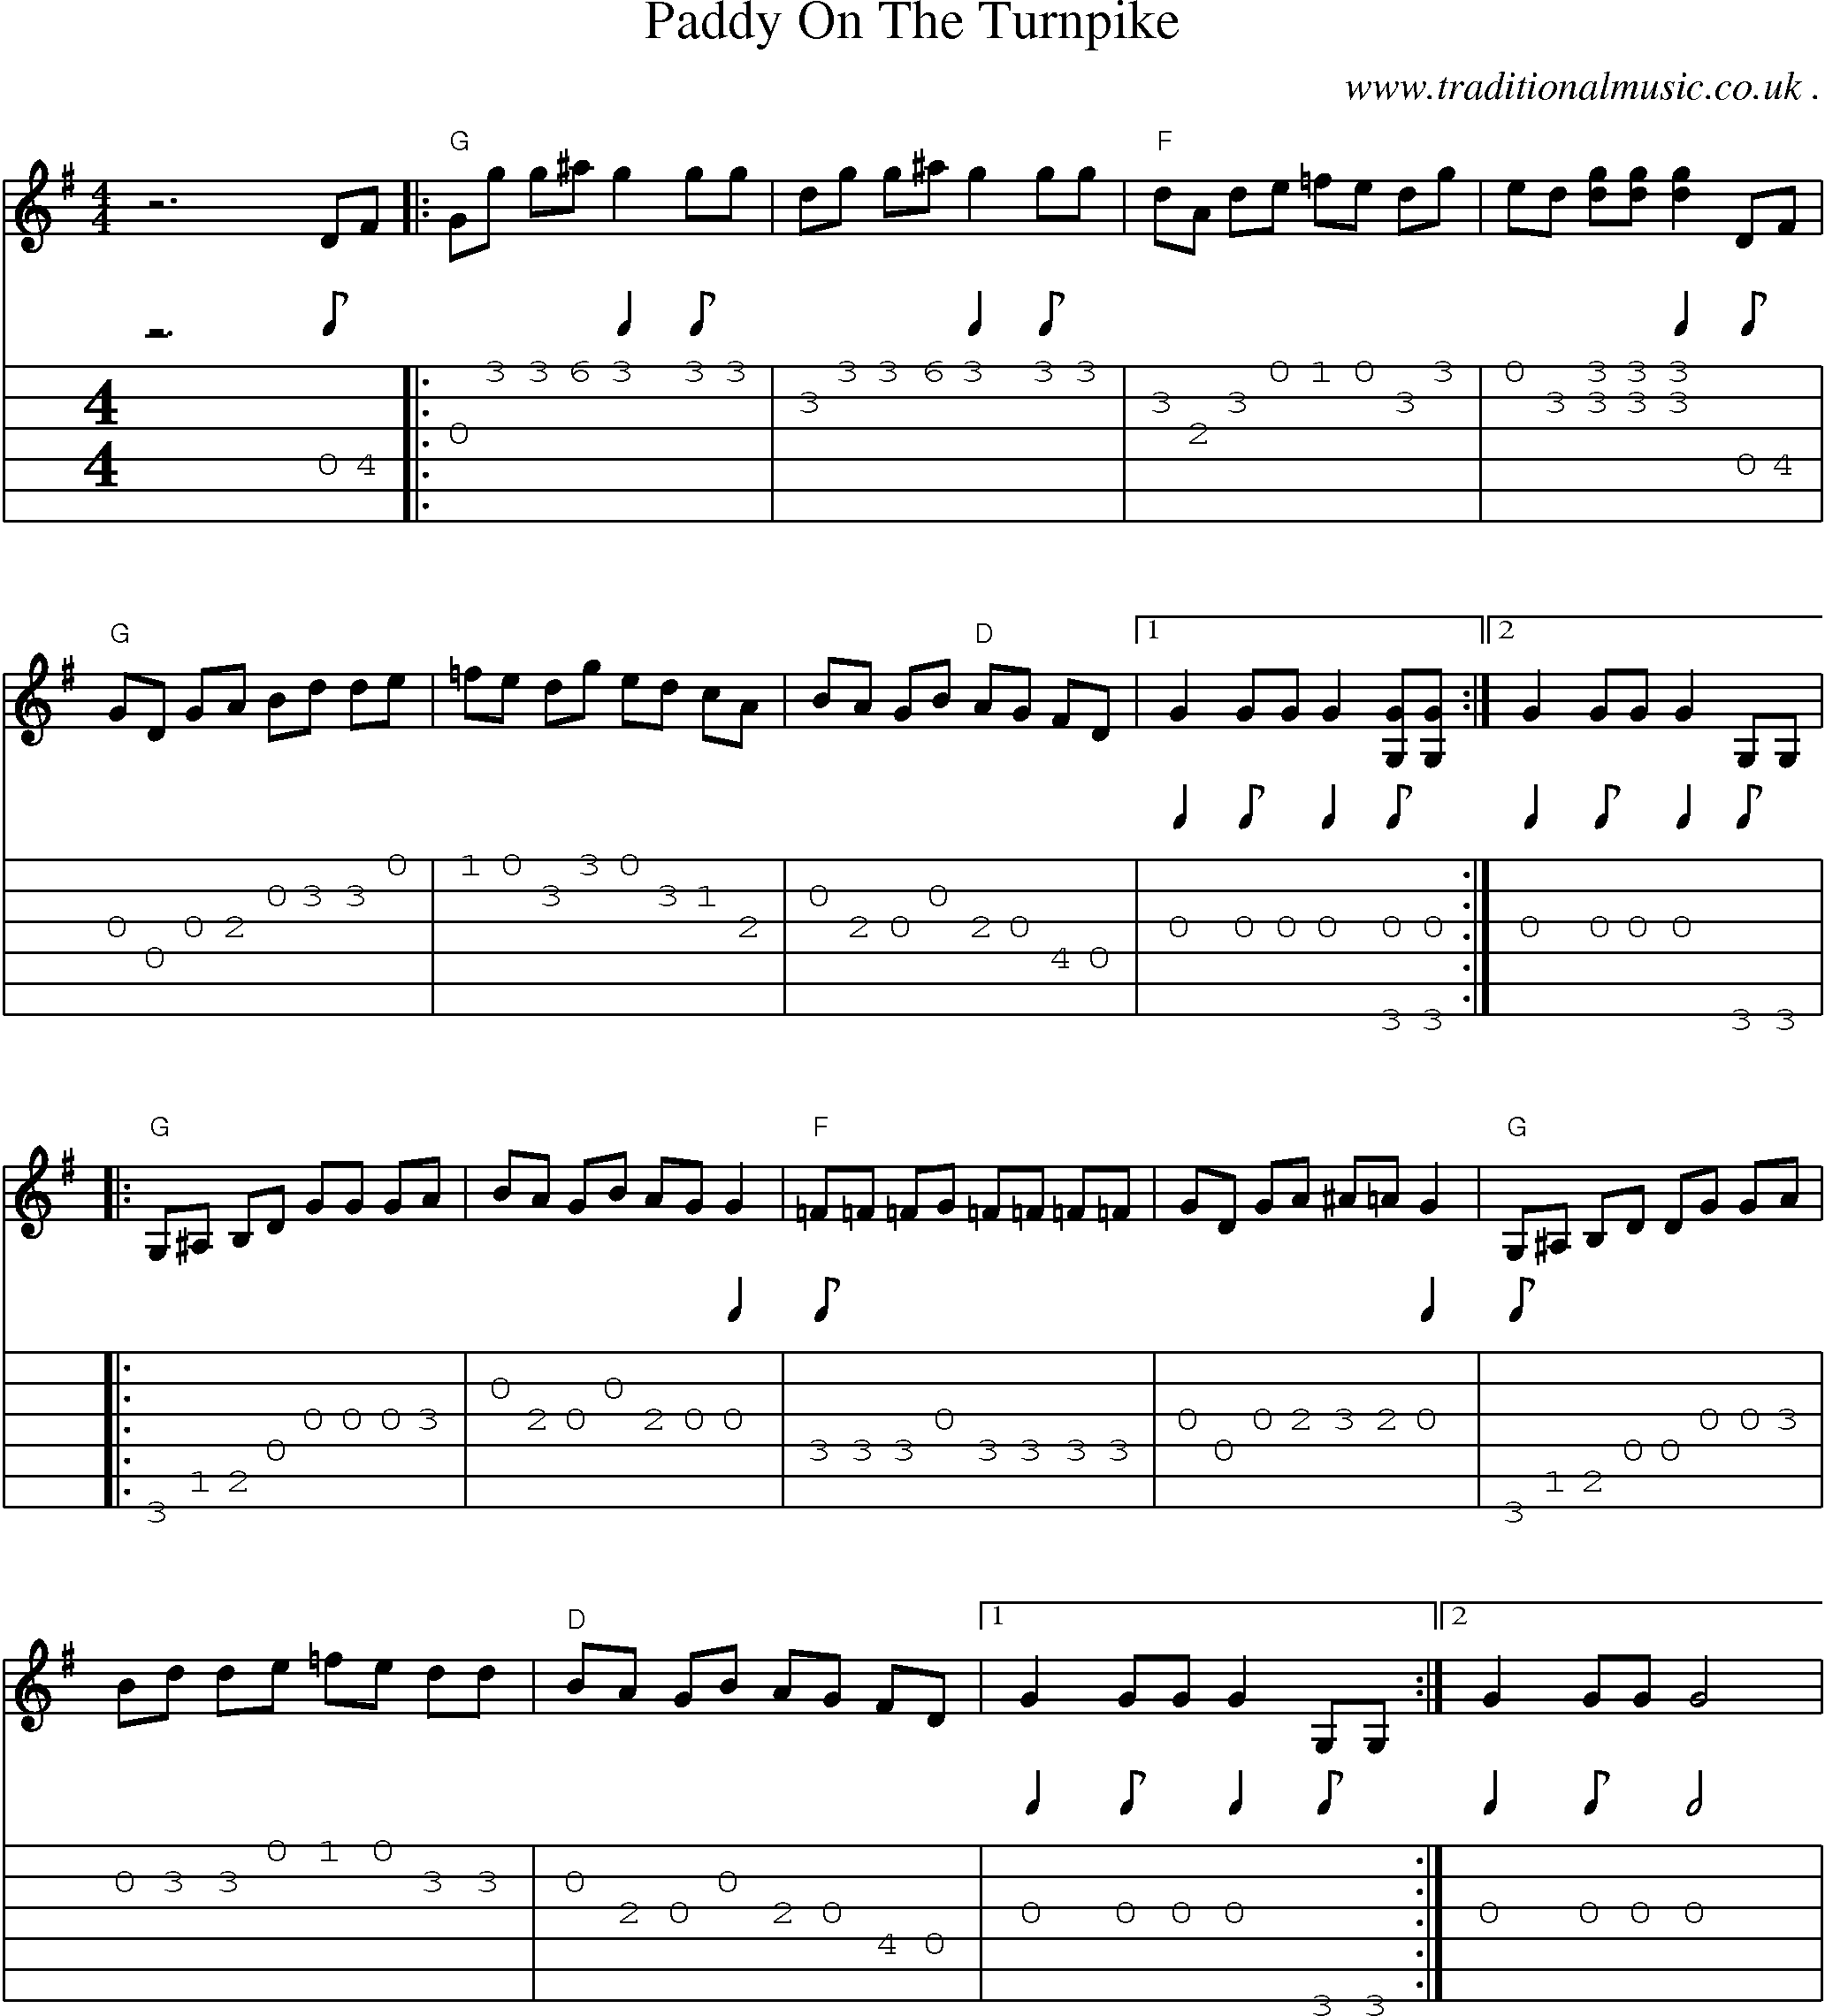 Music Score and Guitar Tabs for Paddy On The Turnpike